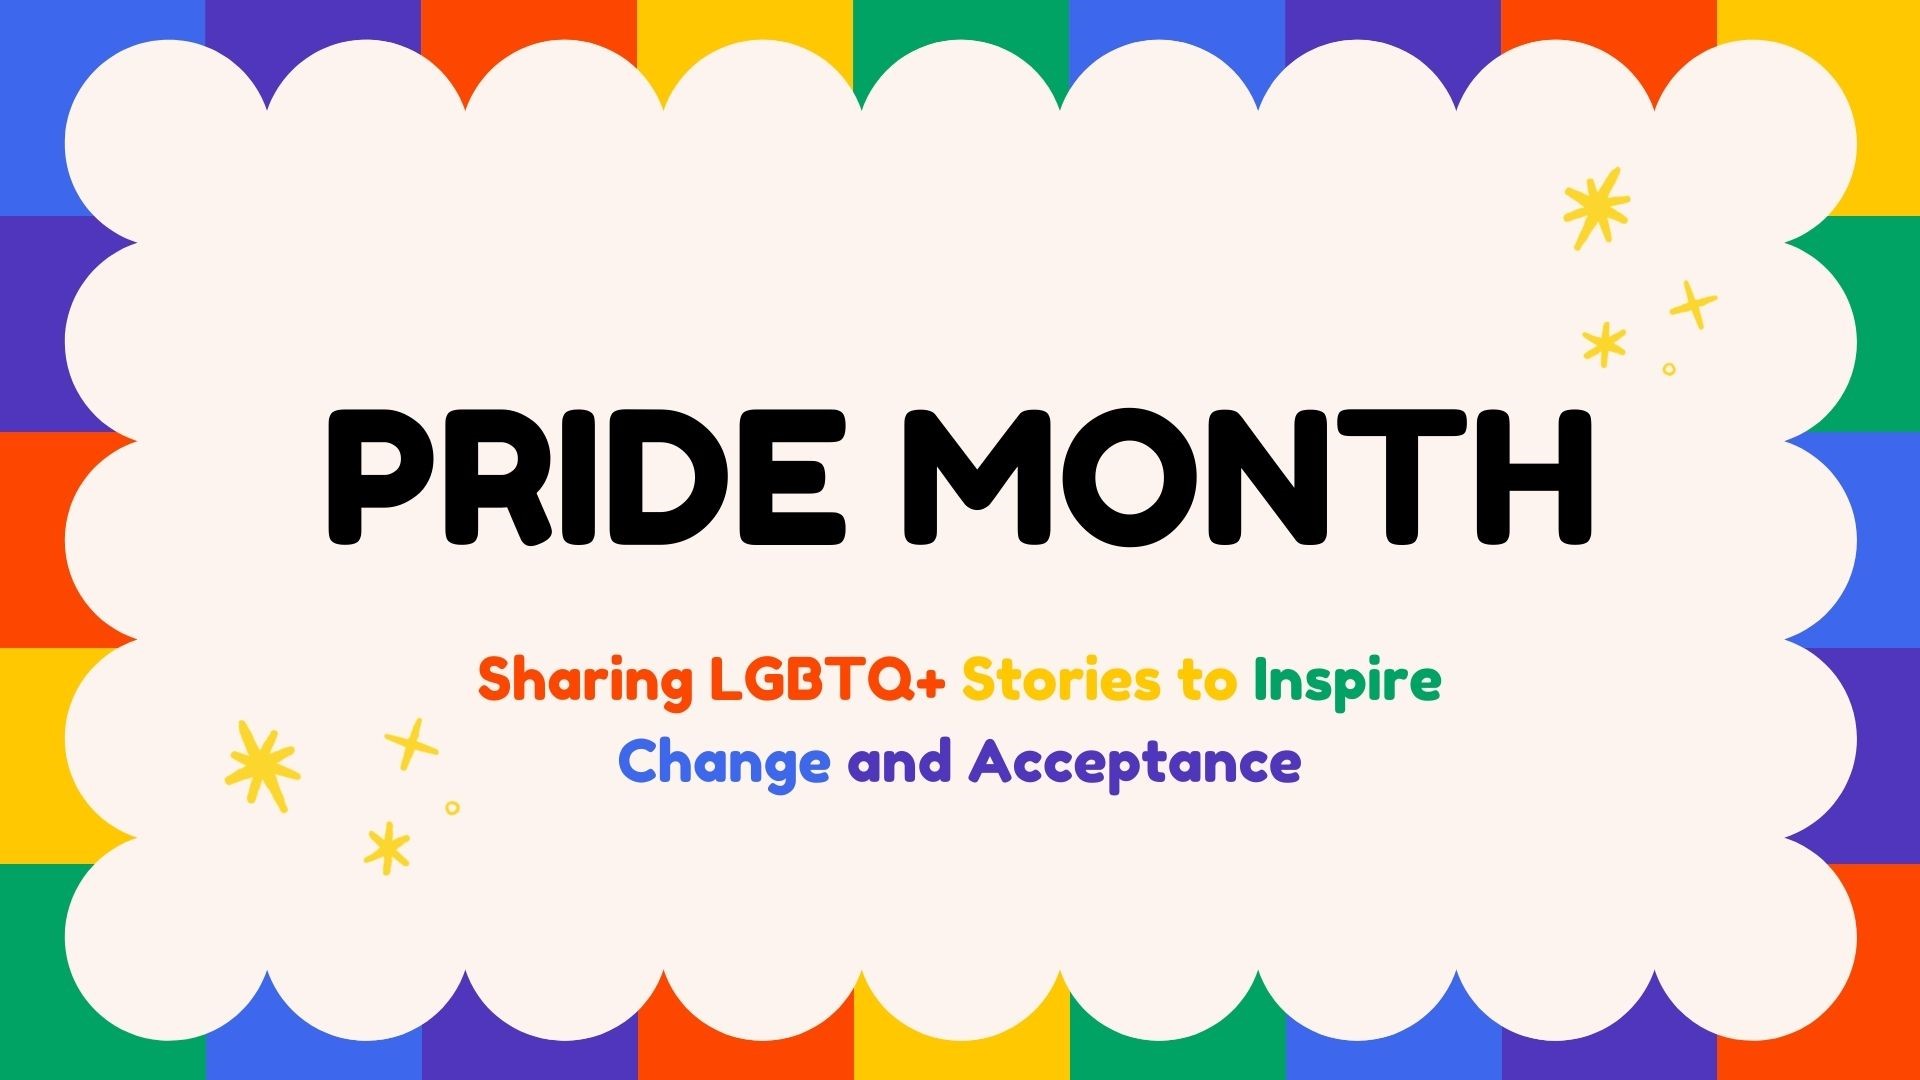 Sharing stories from members of the LGBTQ+ community, as well as impactful stories of change that still needs to happen as we mark Pride month this June.